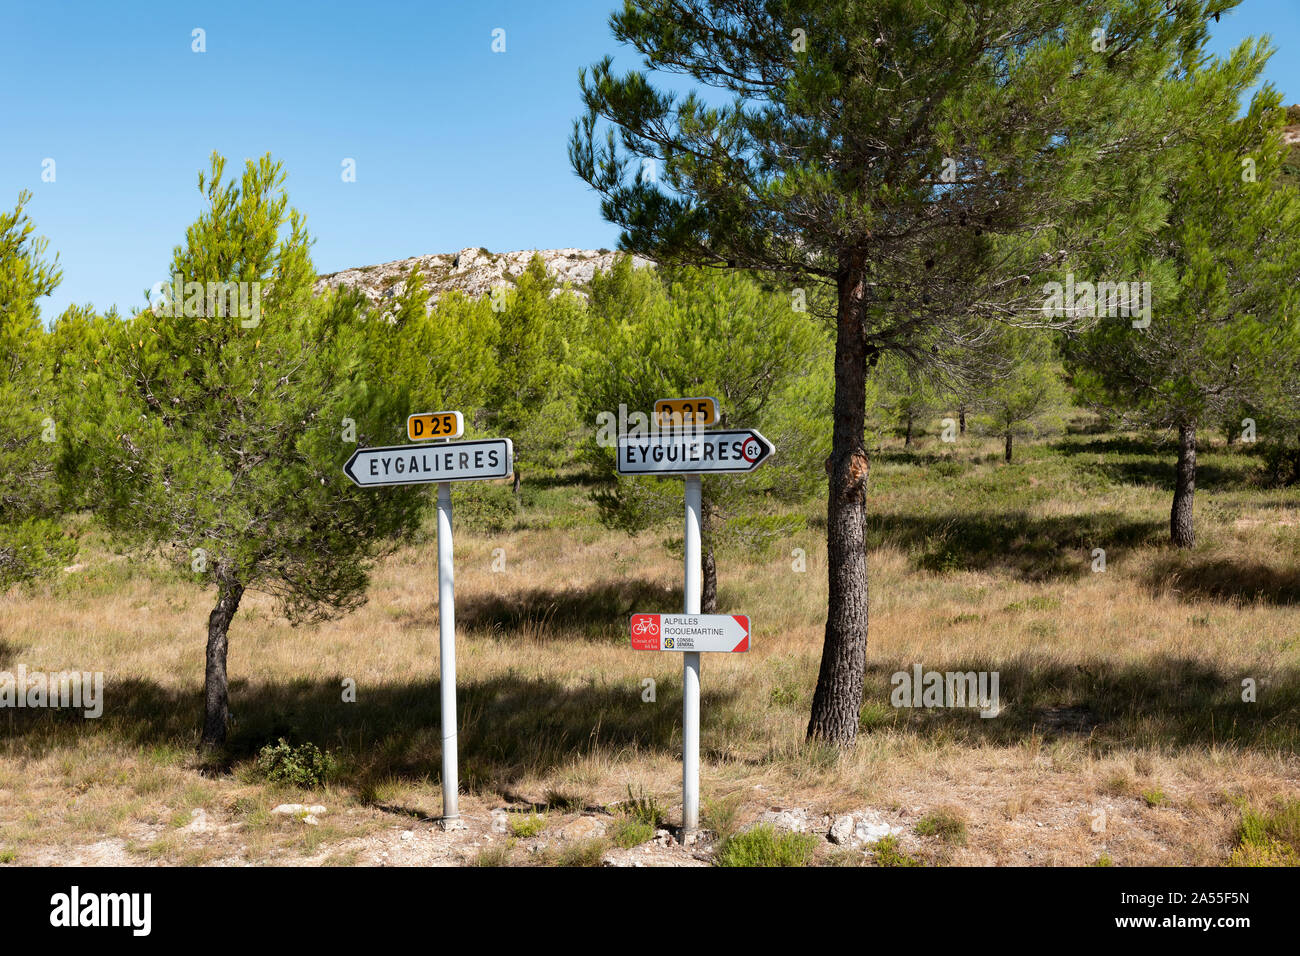 Road signs on the D25 near Aureille, Provence, France. Stock Photo